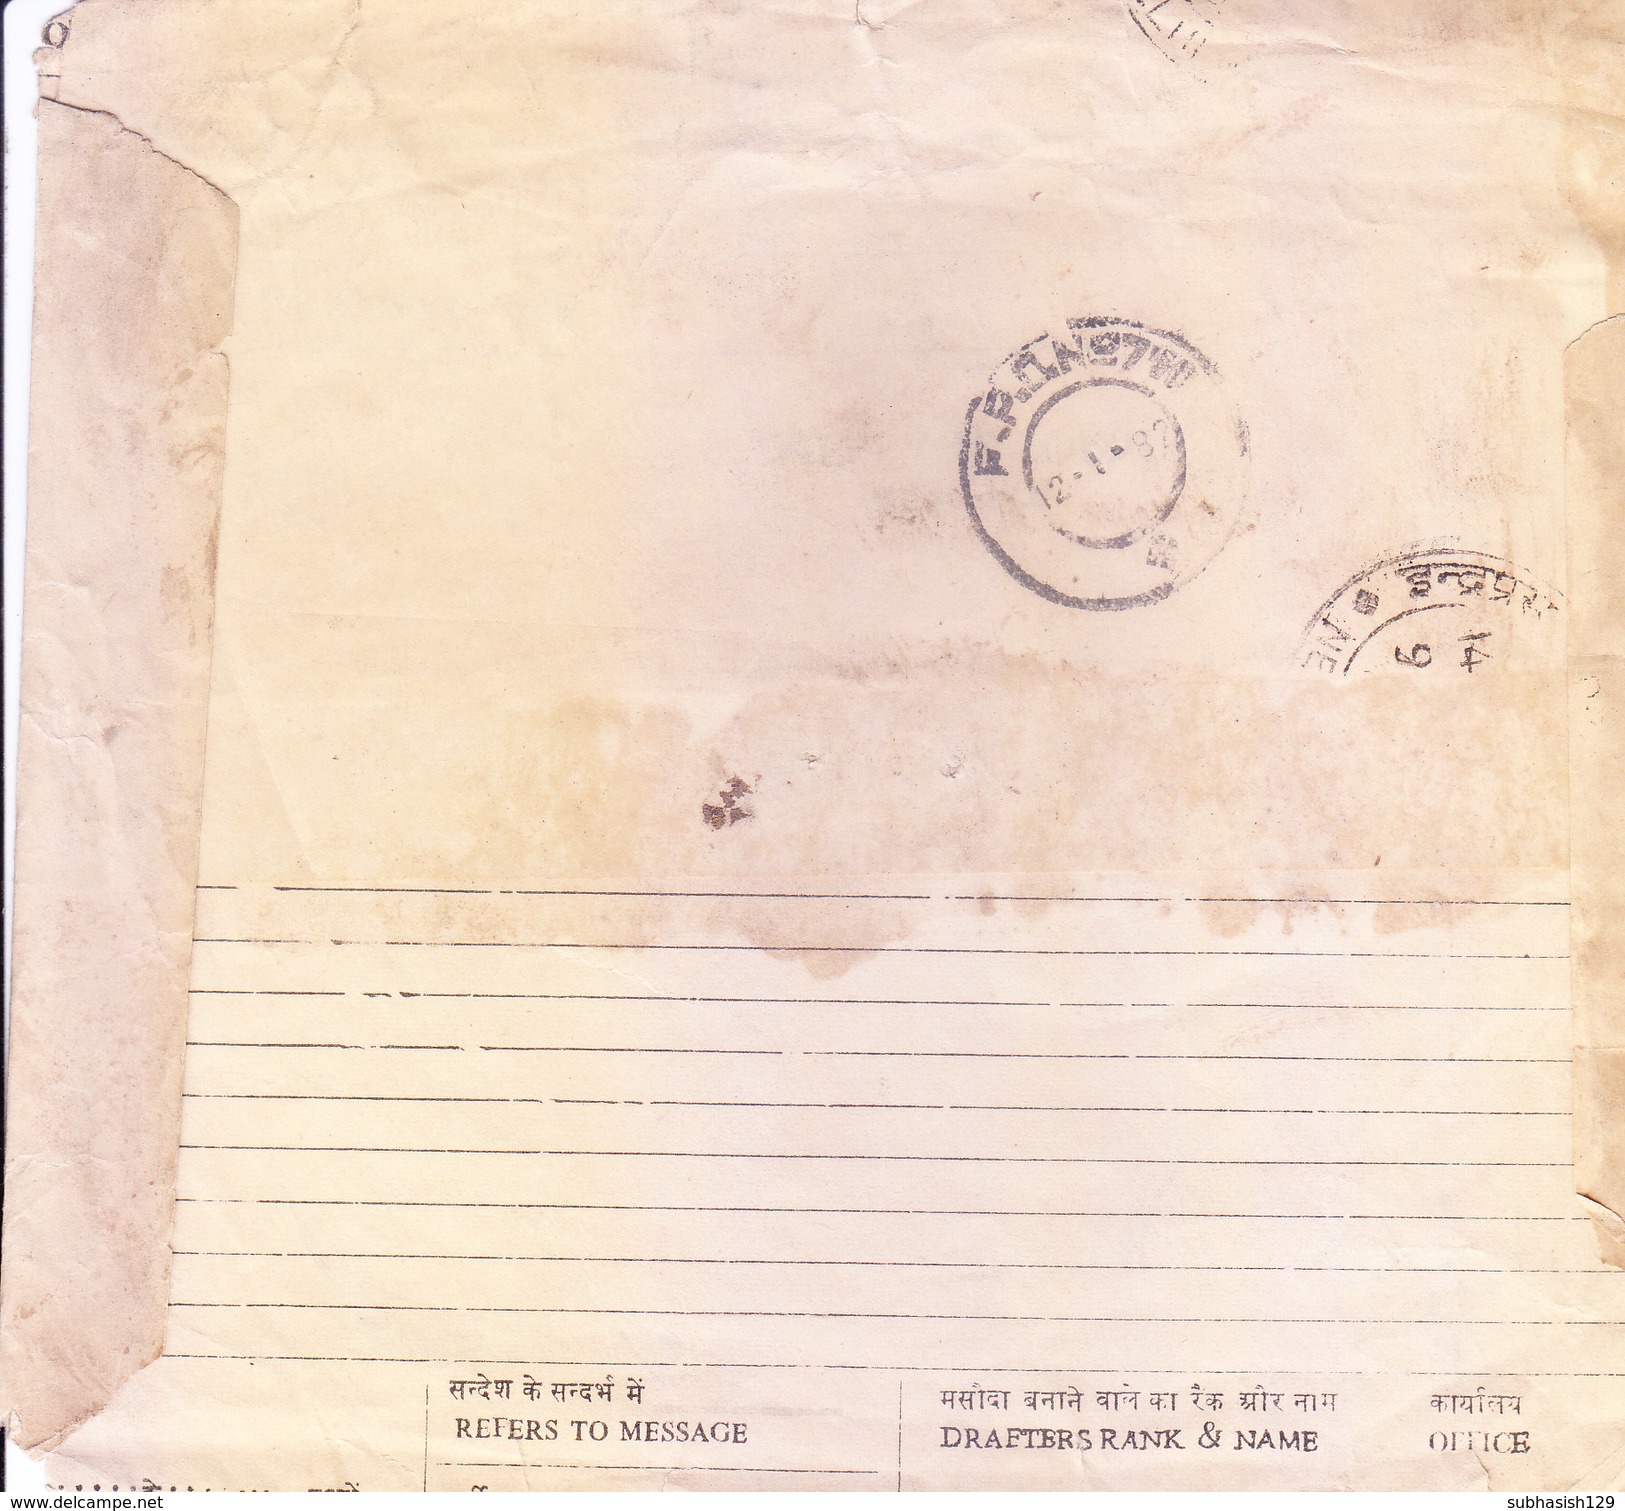 INDIA 1982 ARMY COVER SENT BY POST - SIGNED BY FORCES OFFICIAL WITH OFFICIAL SEAL AND F. P. O. MARKING - Covers & Documents